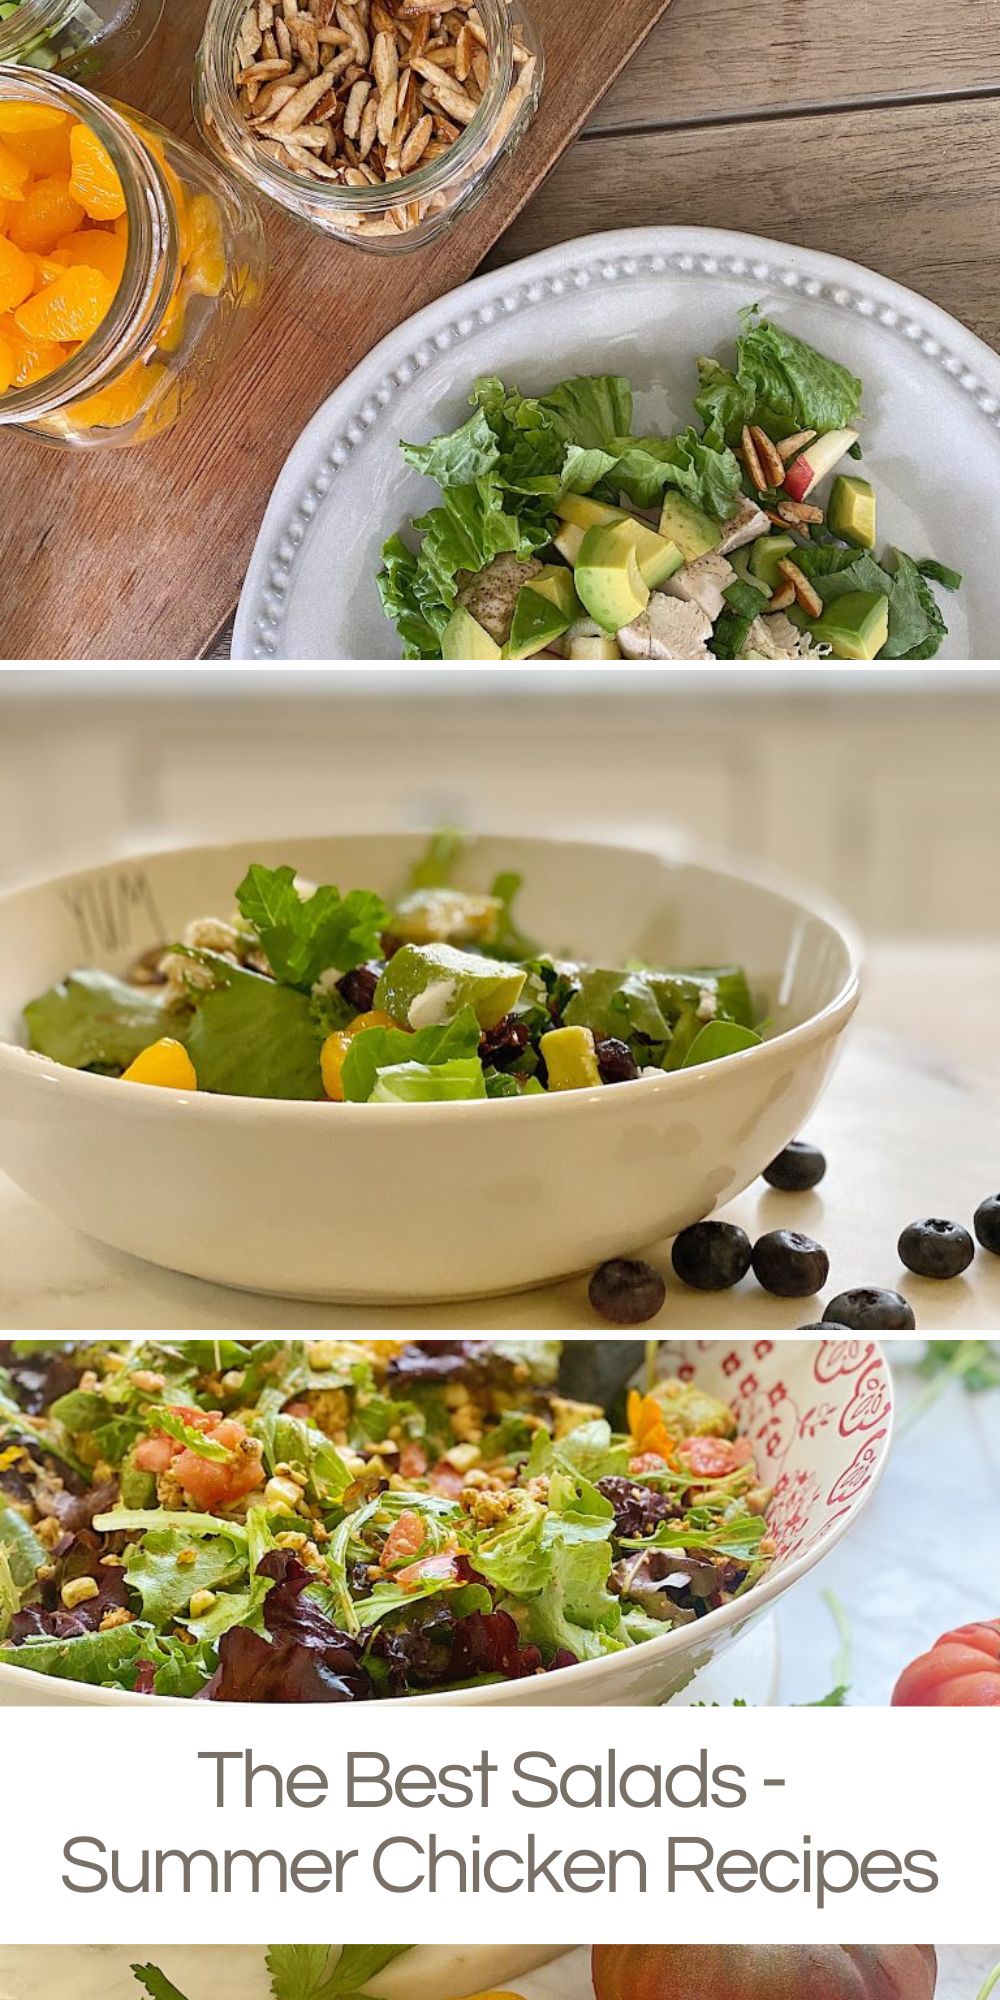 Summer salads are one of my favorite things to eat. Today I am sharing my three favorite salads and they are all summer chicken recipes.